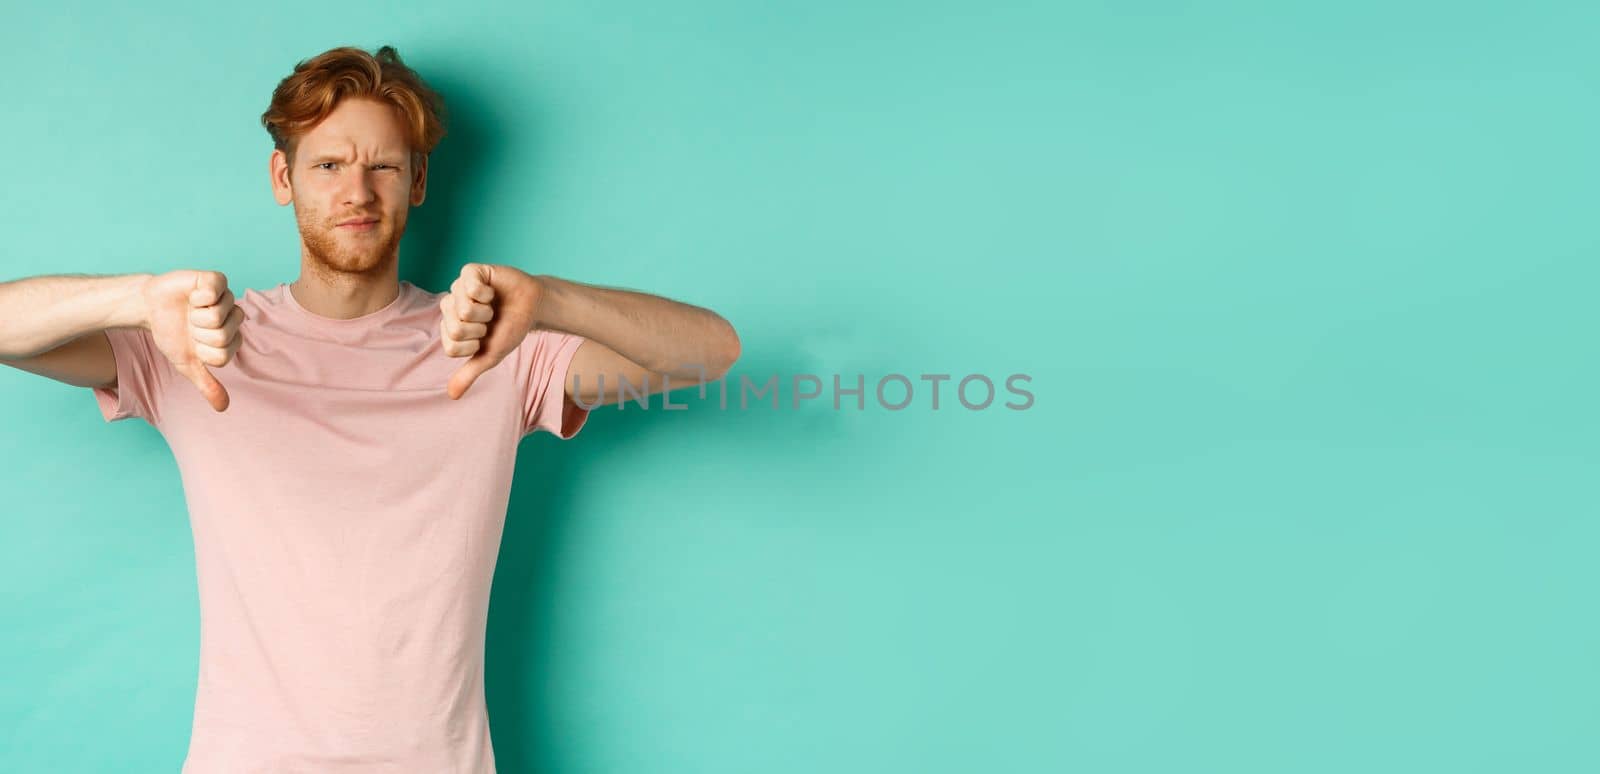 Disappointed guy with red hair showing thumbs-down, frowning and looking skeptical, epxress dislike and disapproval, standing over turquoise background.